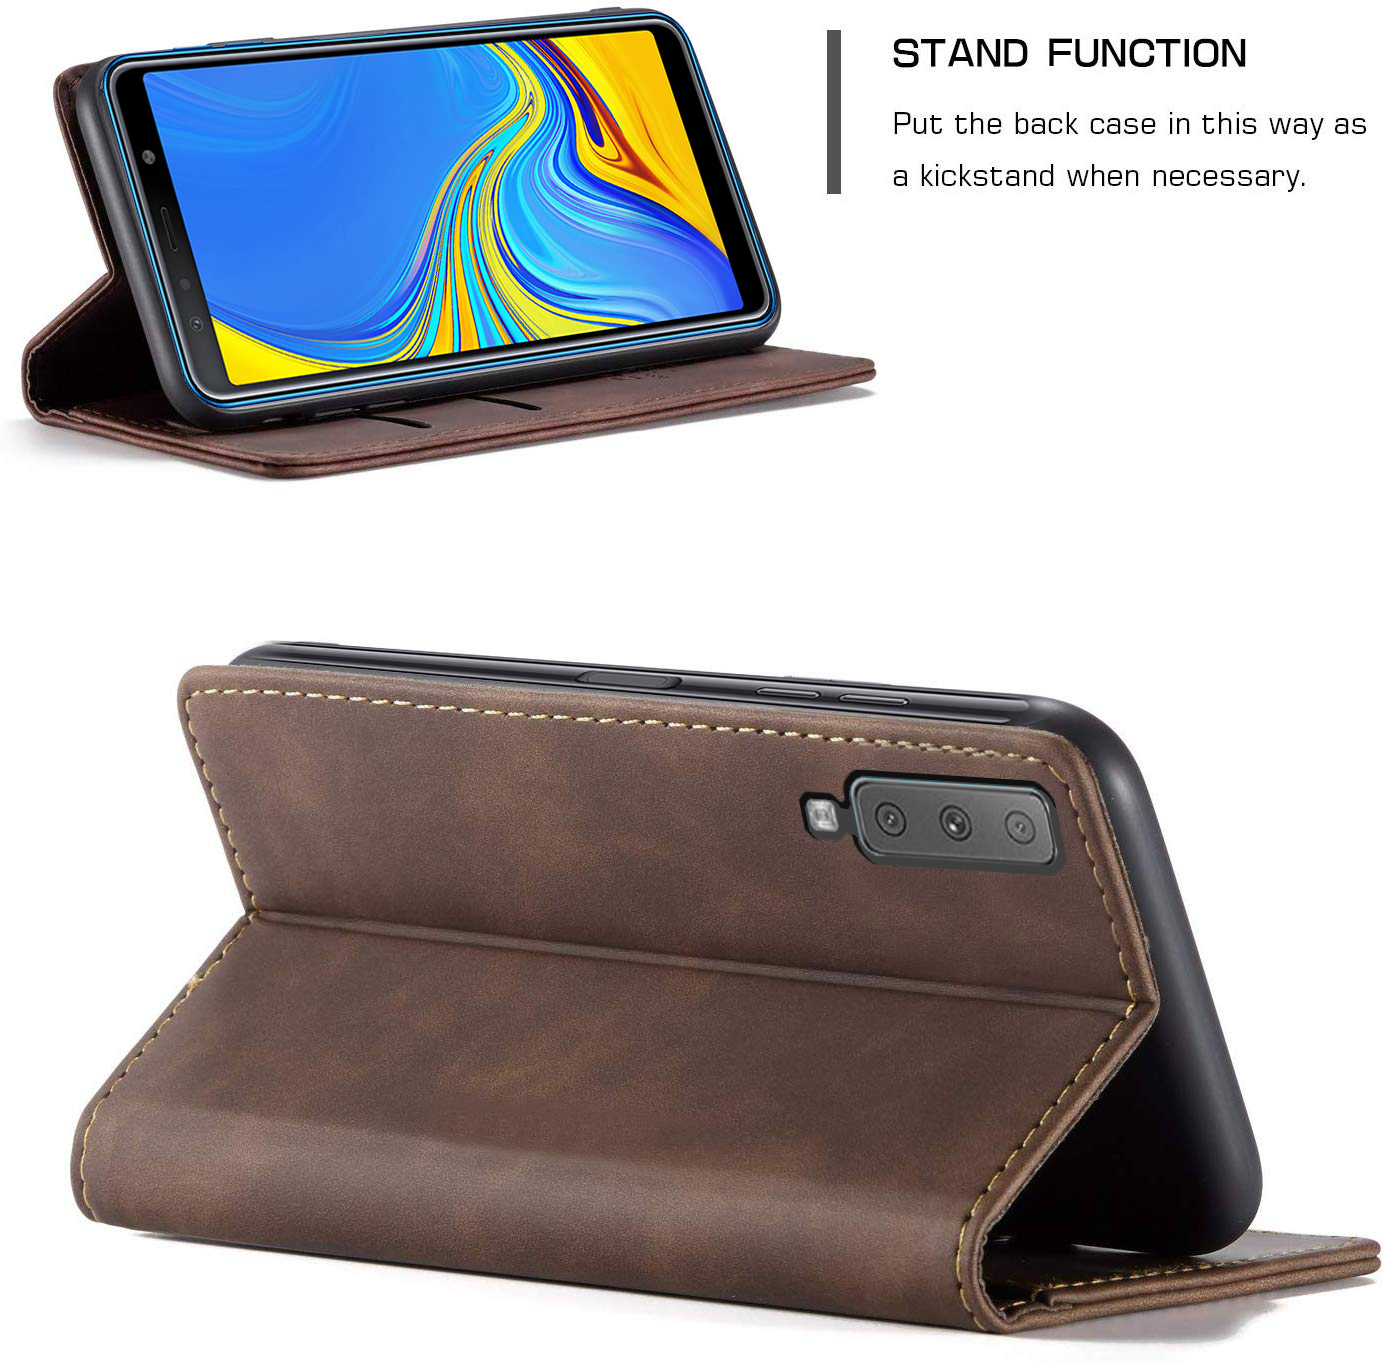 Samsung Galaxy A7 2018 Leather Wallet flip case cover with stand function